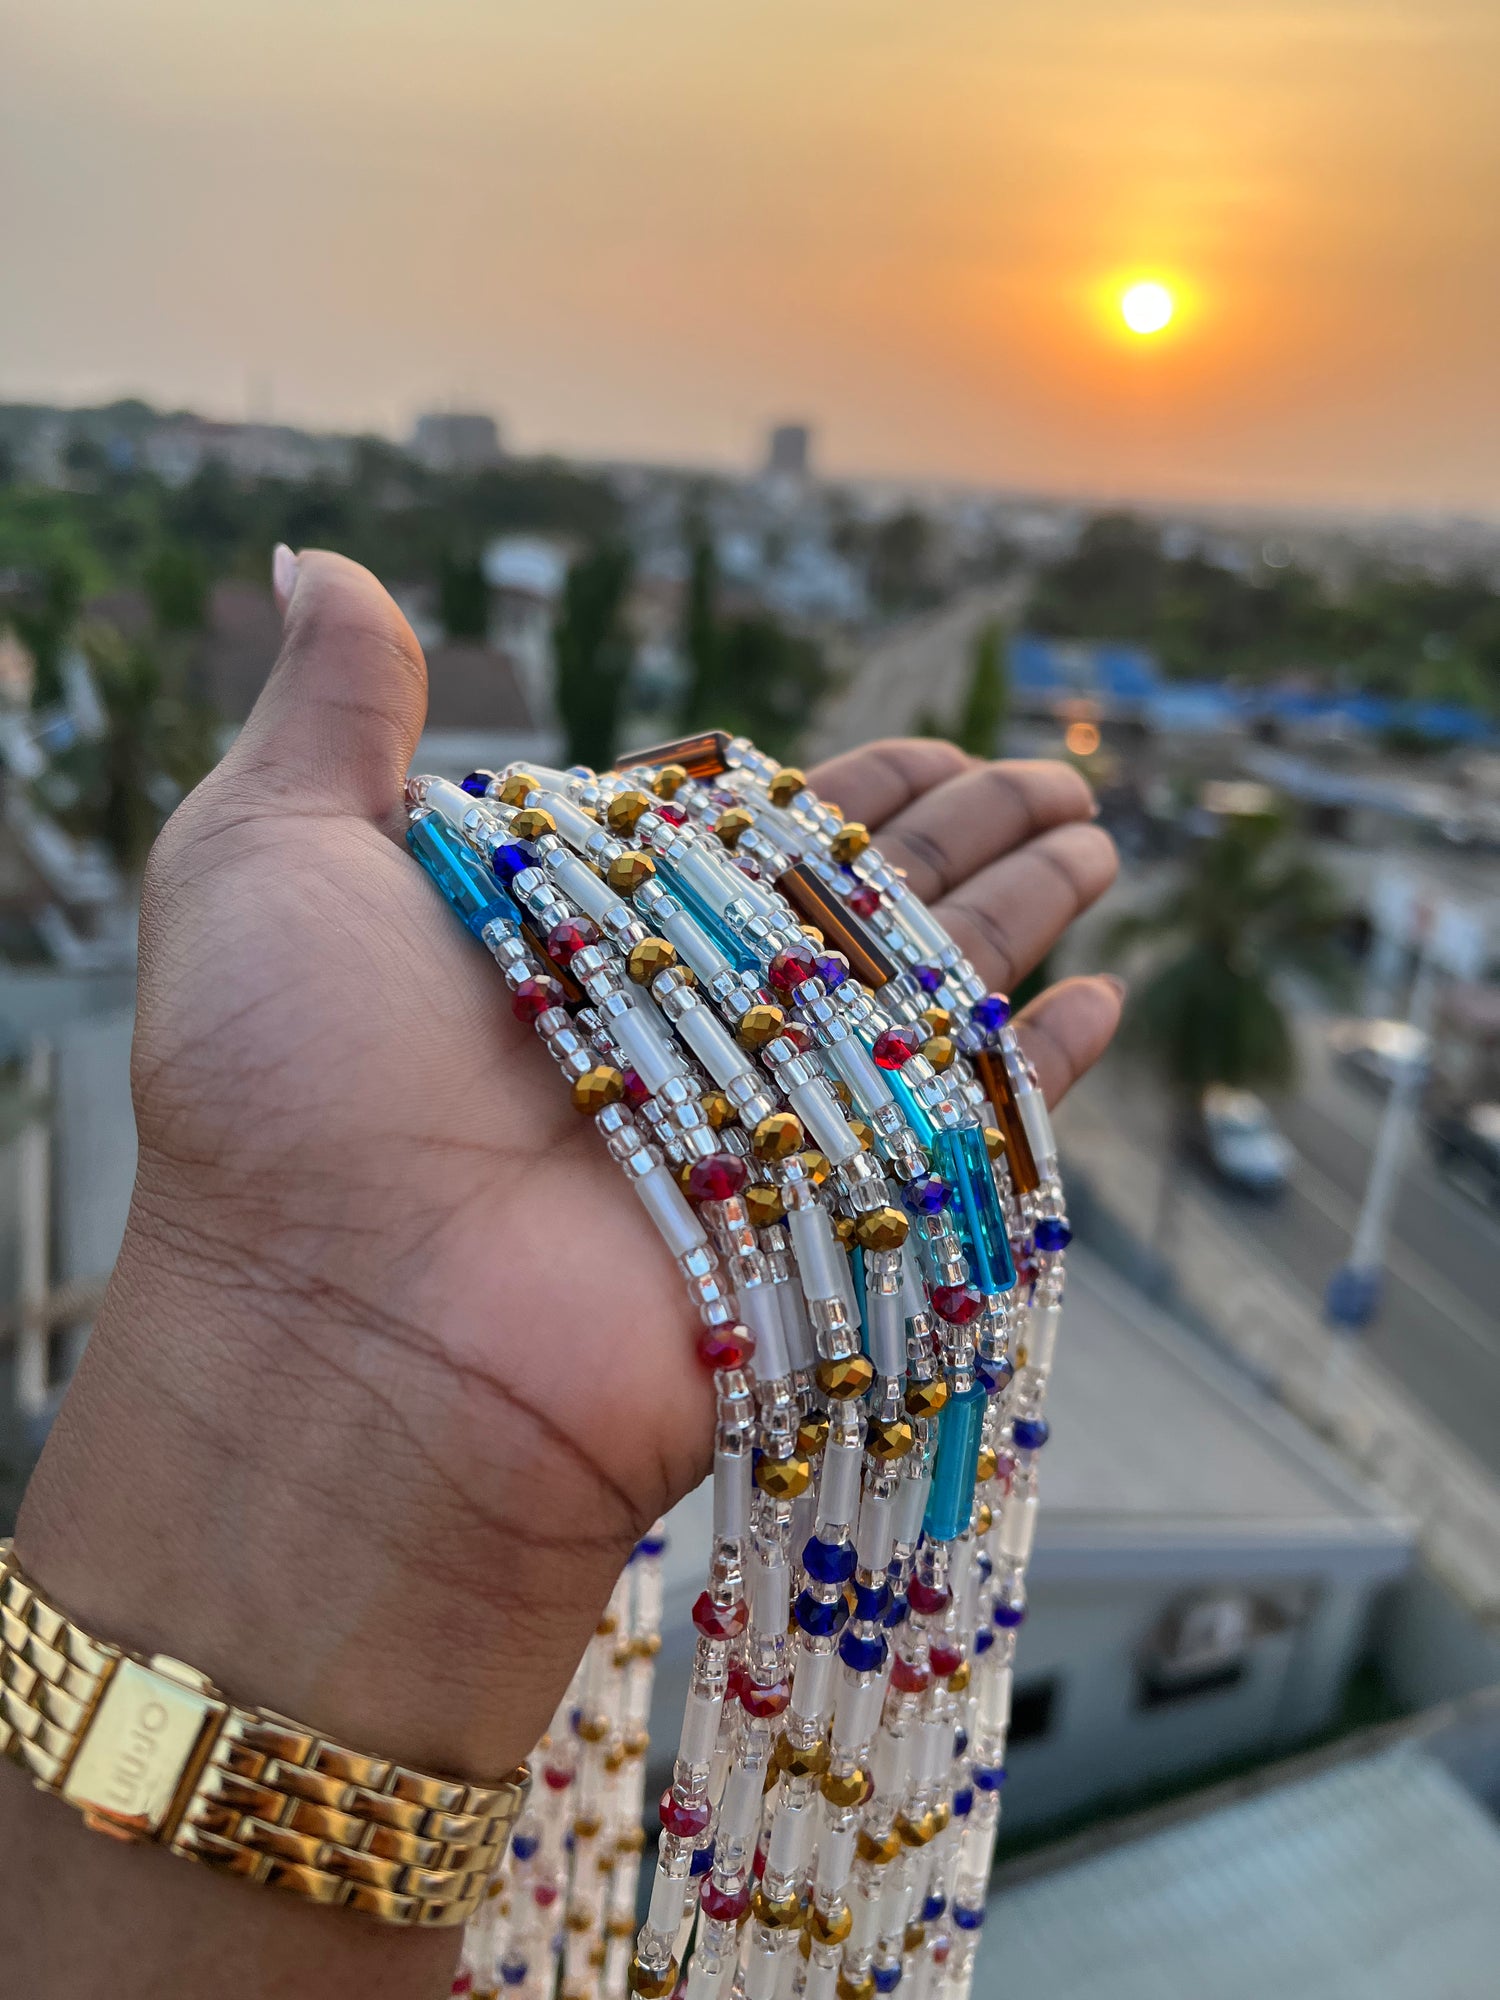 *Limited Edition* Finest African Waist beads - Get 5 for 50% Off at checkout 🔥